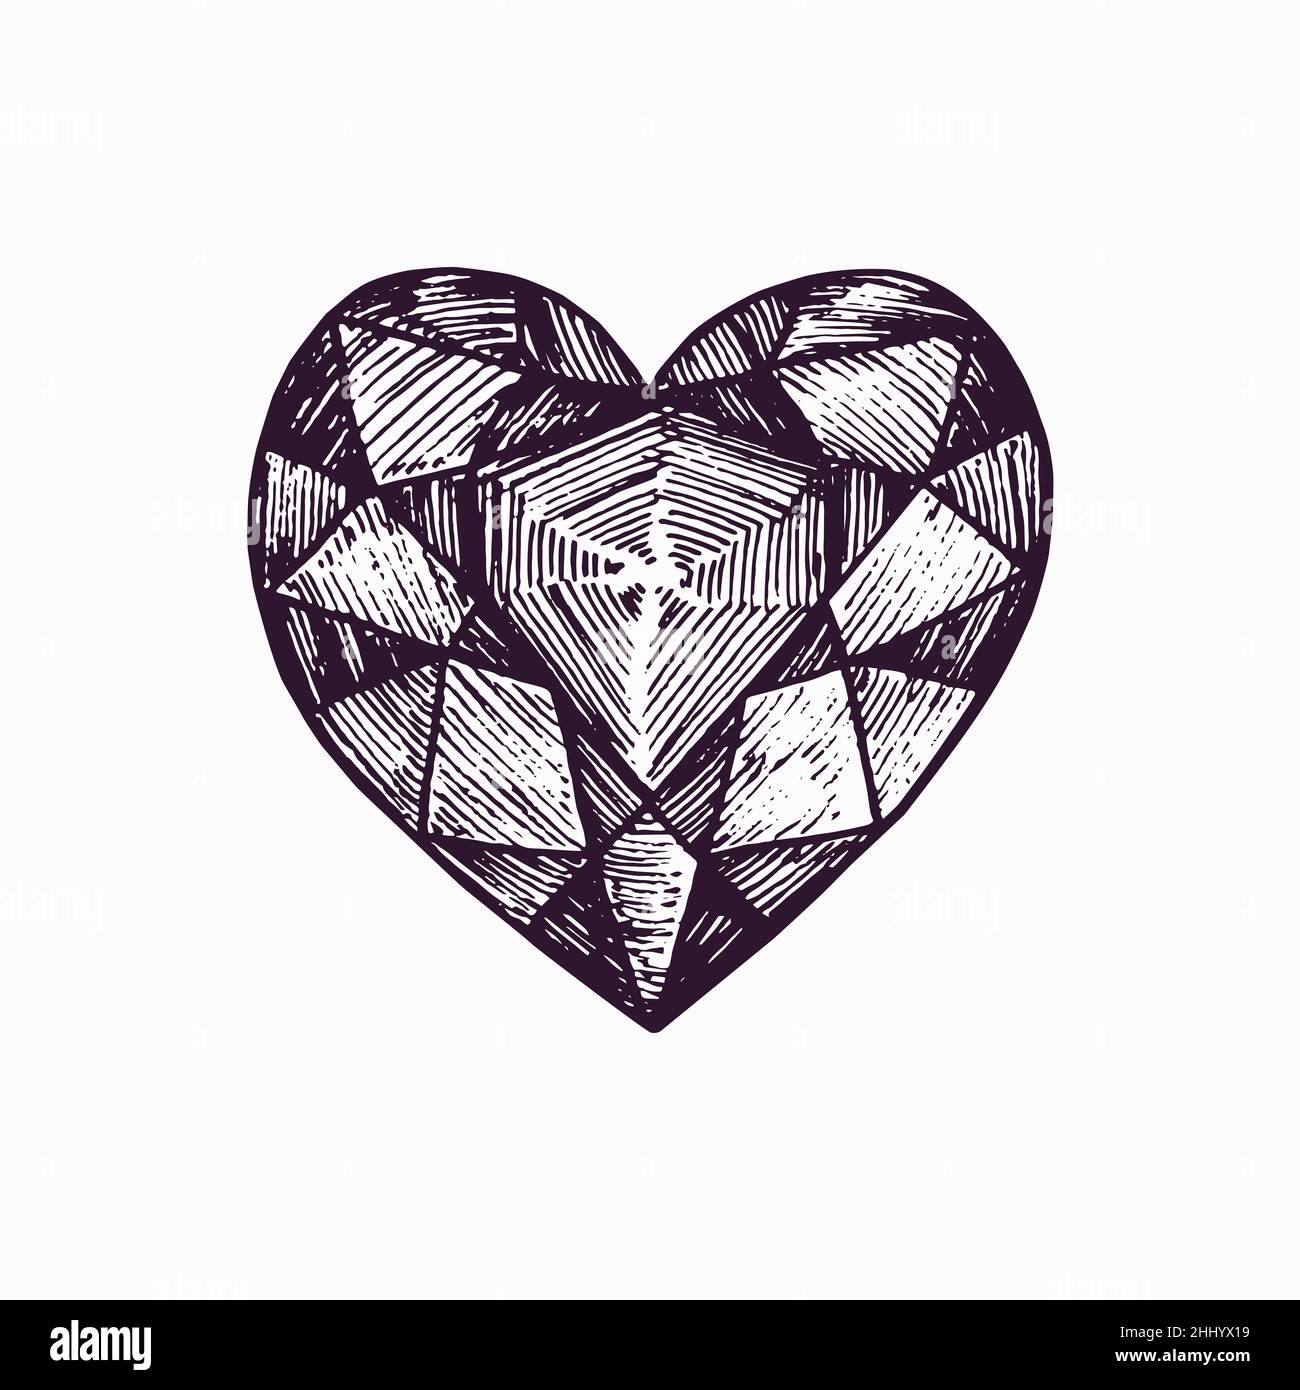 Heart shaped crystal, simple doodle drawing, gravure style Stock Photo